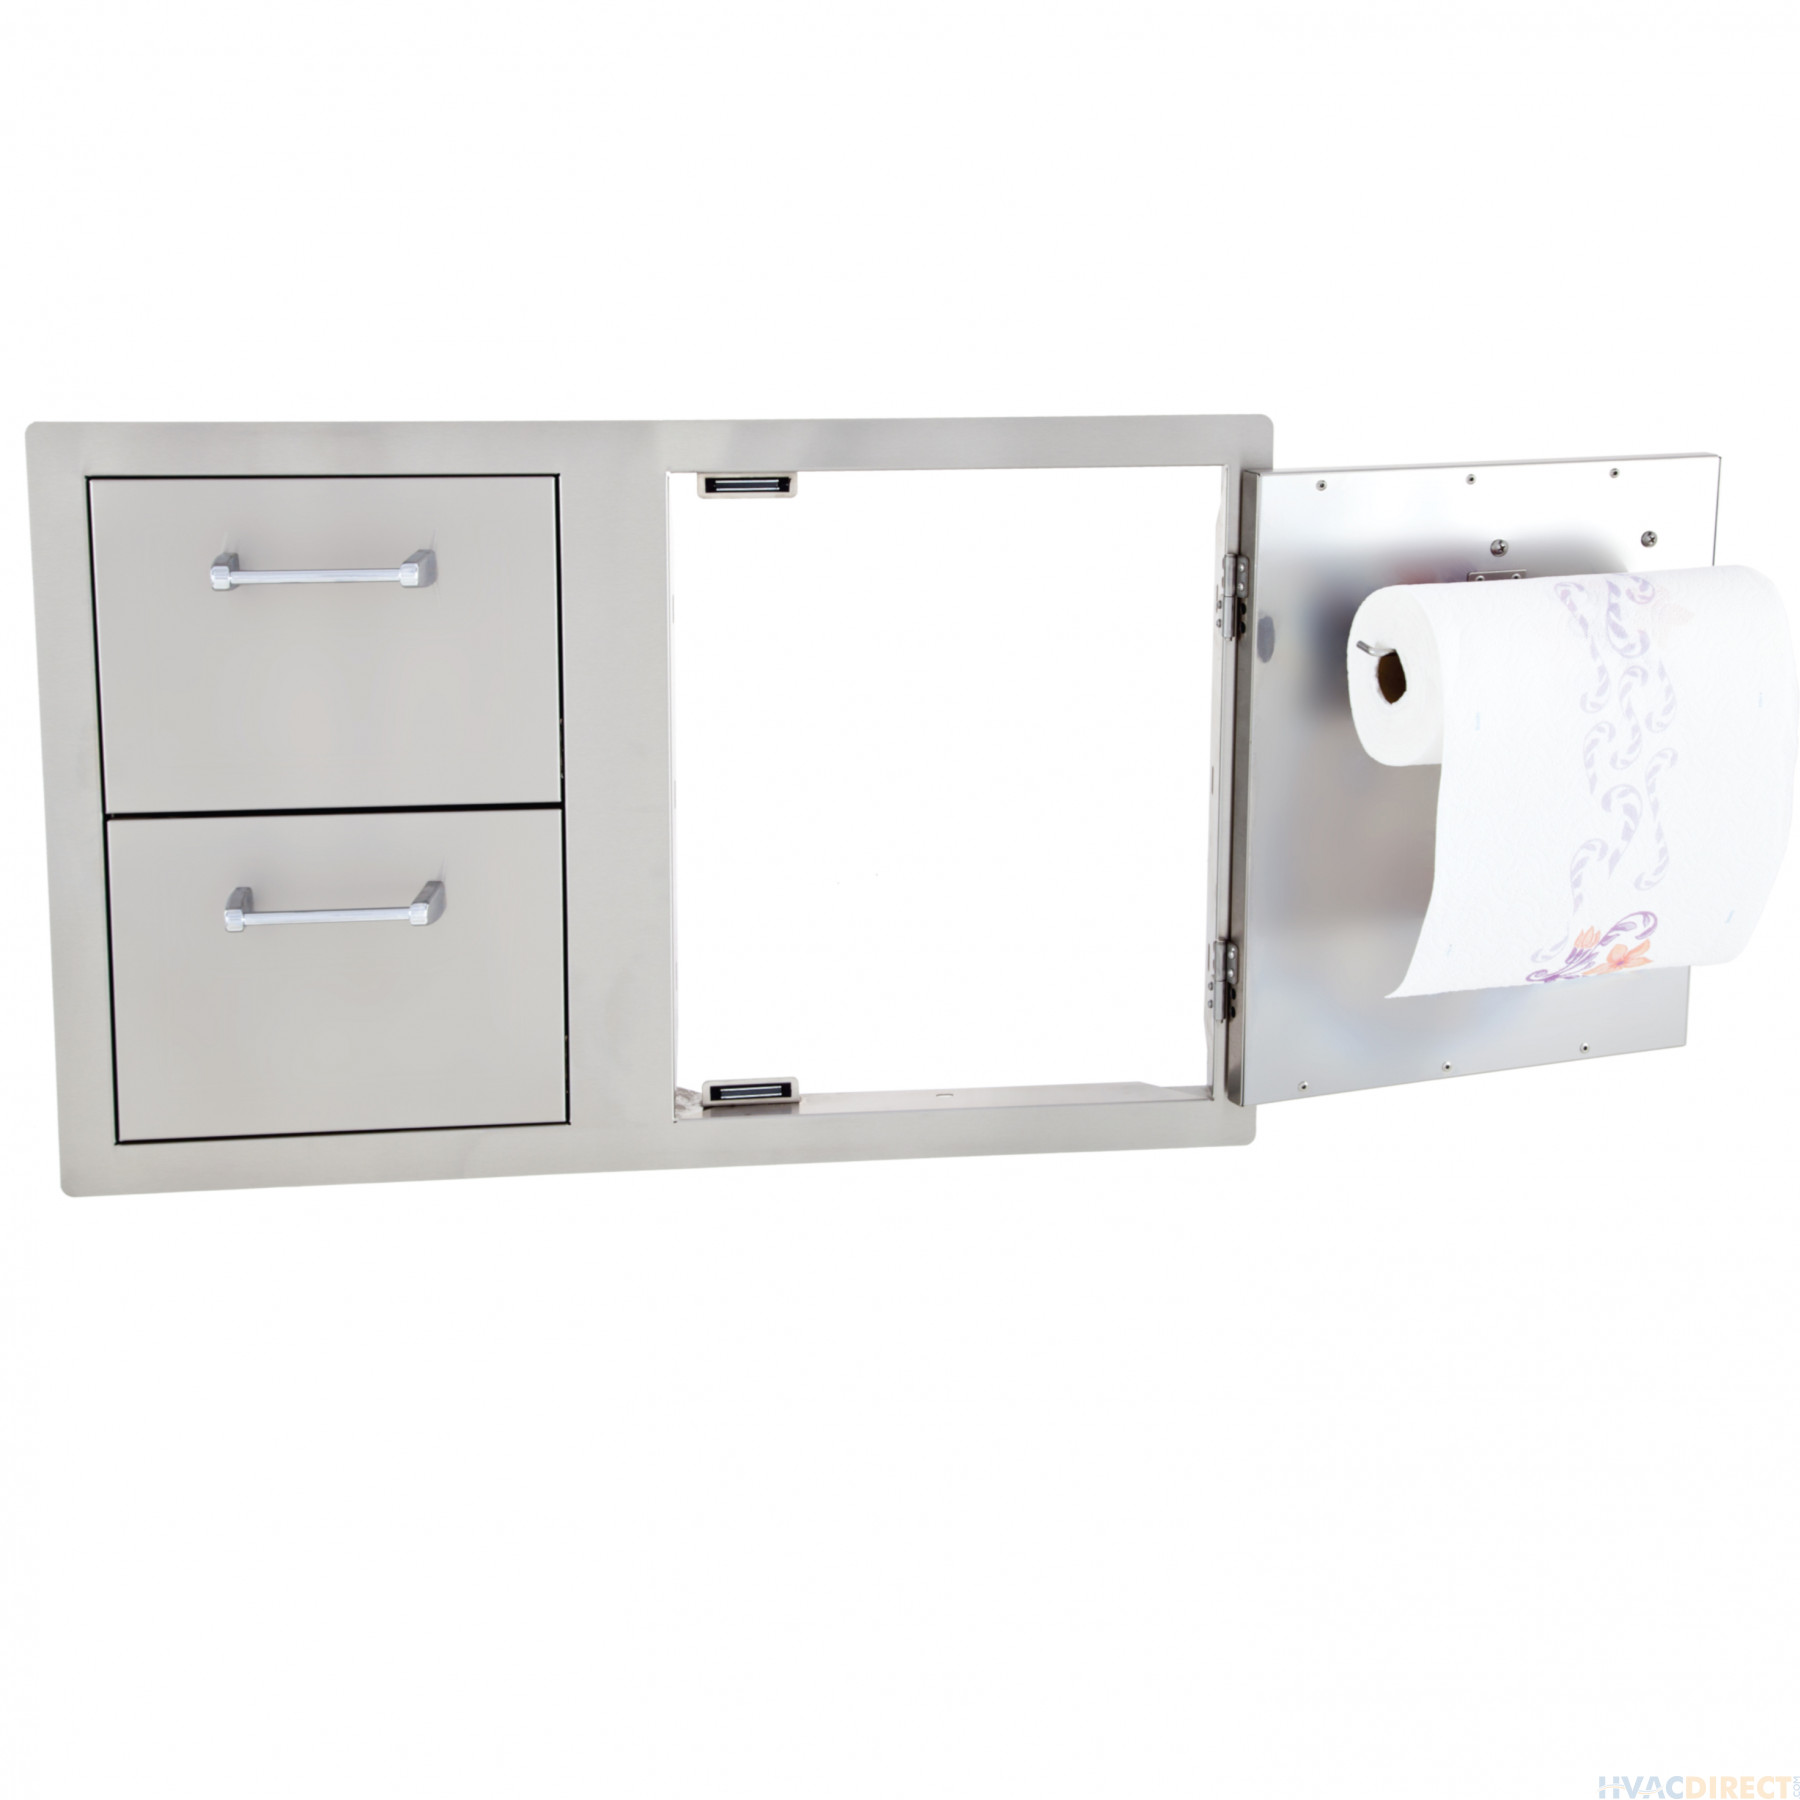 Lion 33-Inch Access Door & Double Drawer Combo with Towel Rack